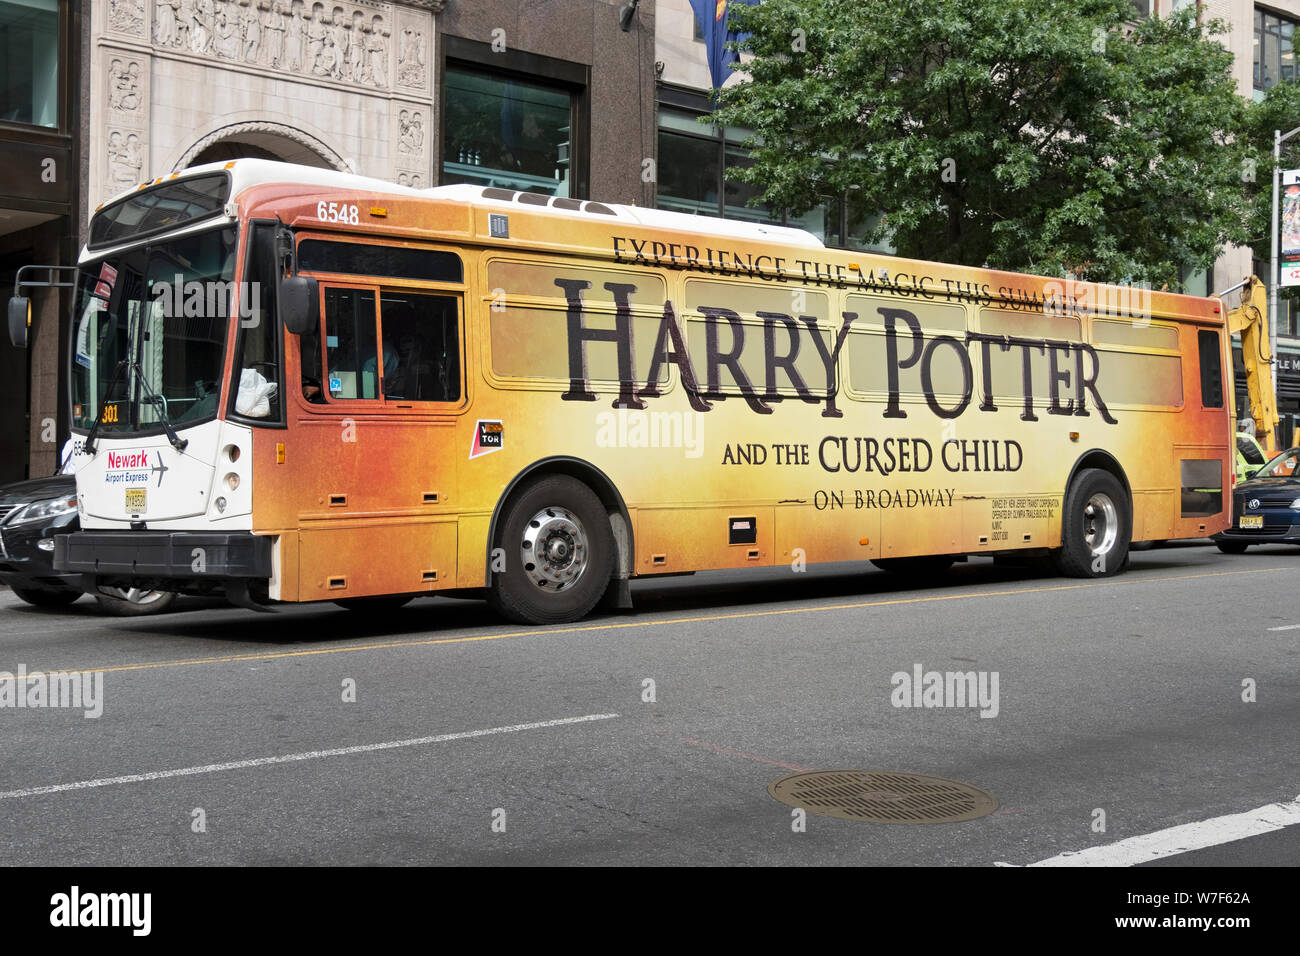 An airport express bus with a huge advertisement for the Harry Potter play on Broadway. On West 42nd Street in Midtown Manhattan, New York City. Stock Photo